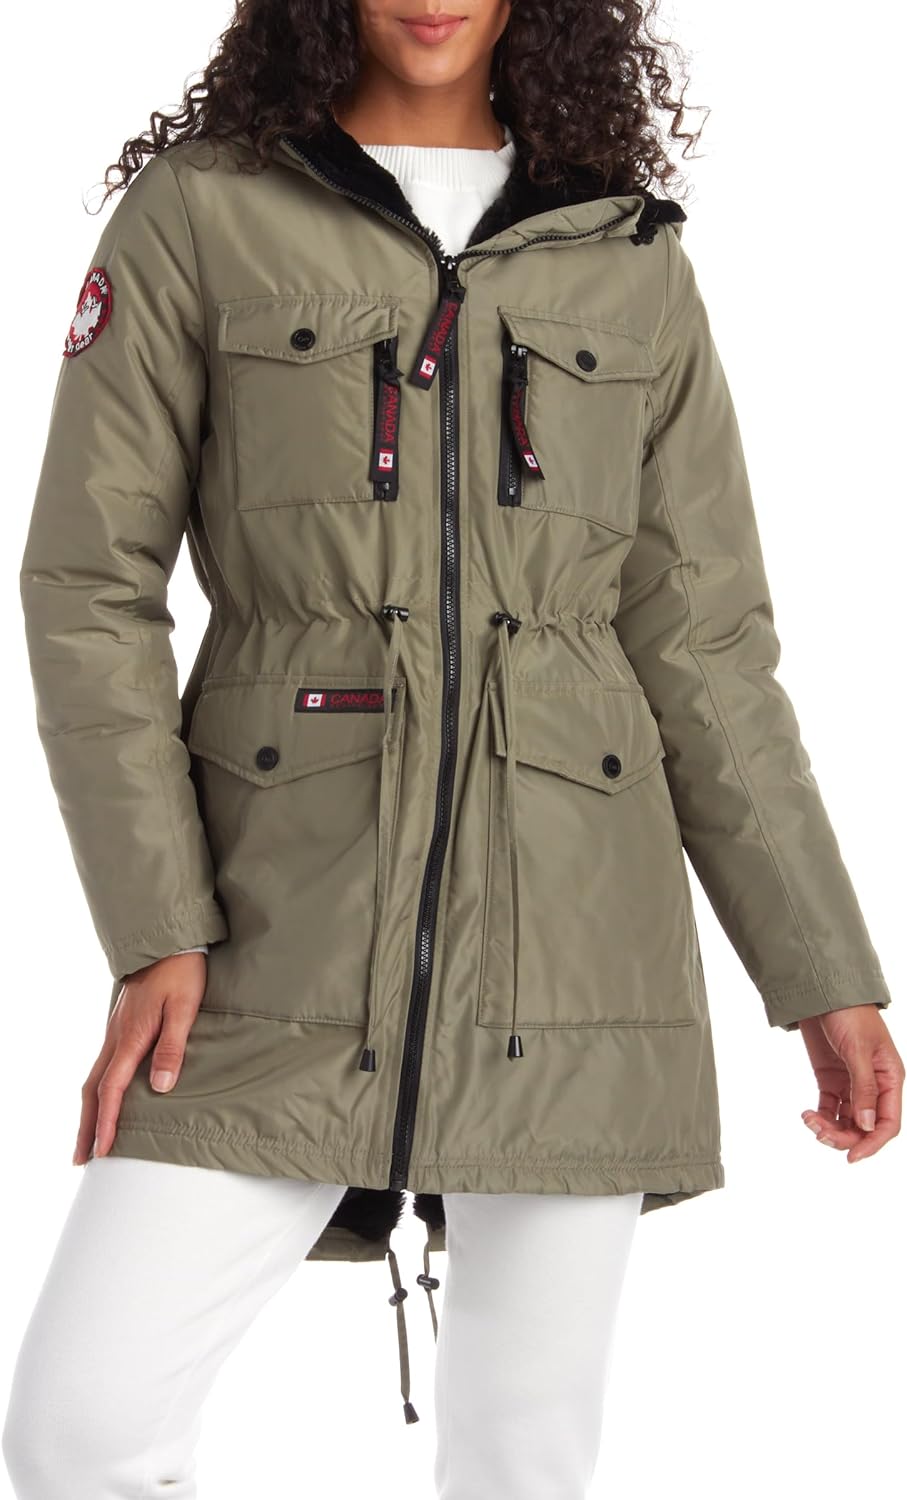 CANADA WEATHER GEAR Womens Winter Coat – Heavyweight Sherpa Lined Anorak Parka (S-XL) - image 1 of 7